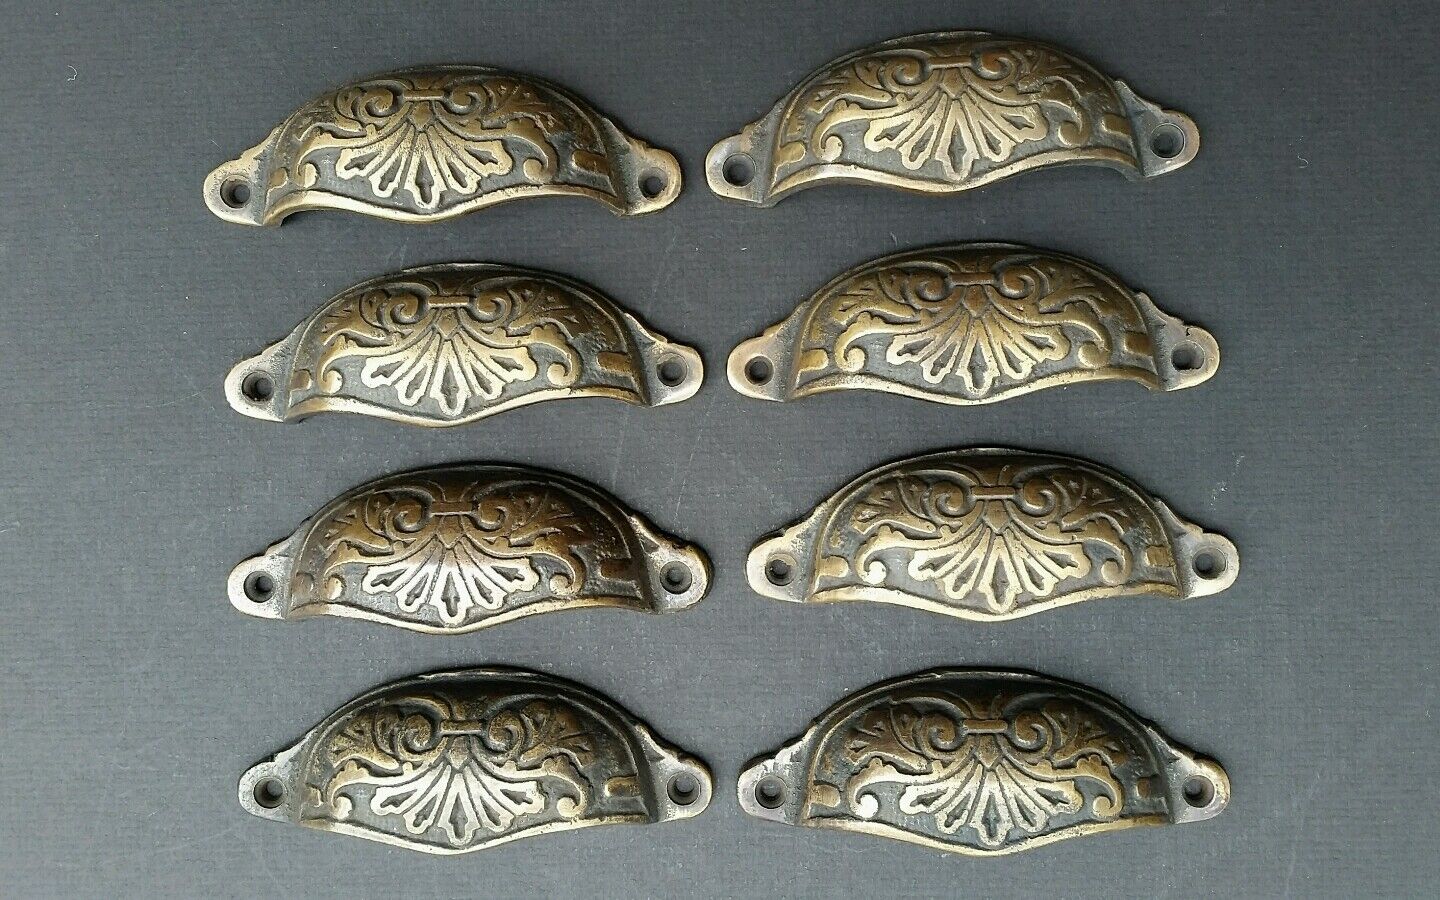 10 Apothecary Drawer Cup Bin Pull Handles 3-1/2"c. Antique Vict. Style Brass #A1